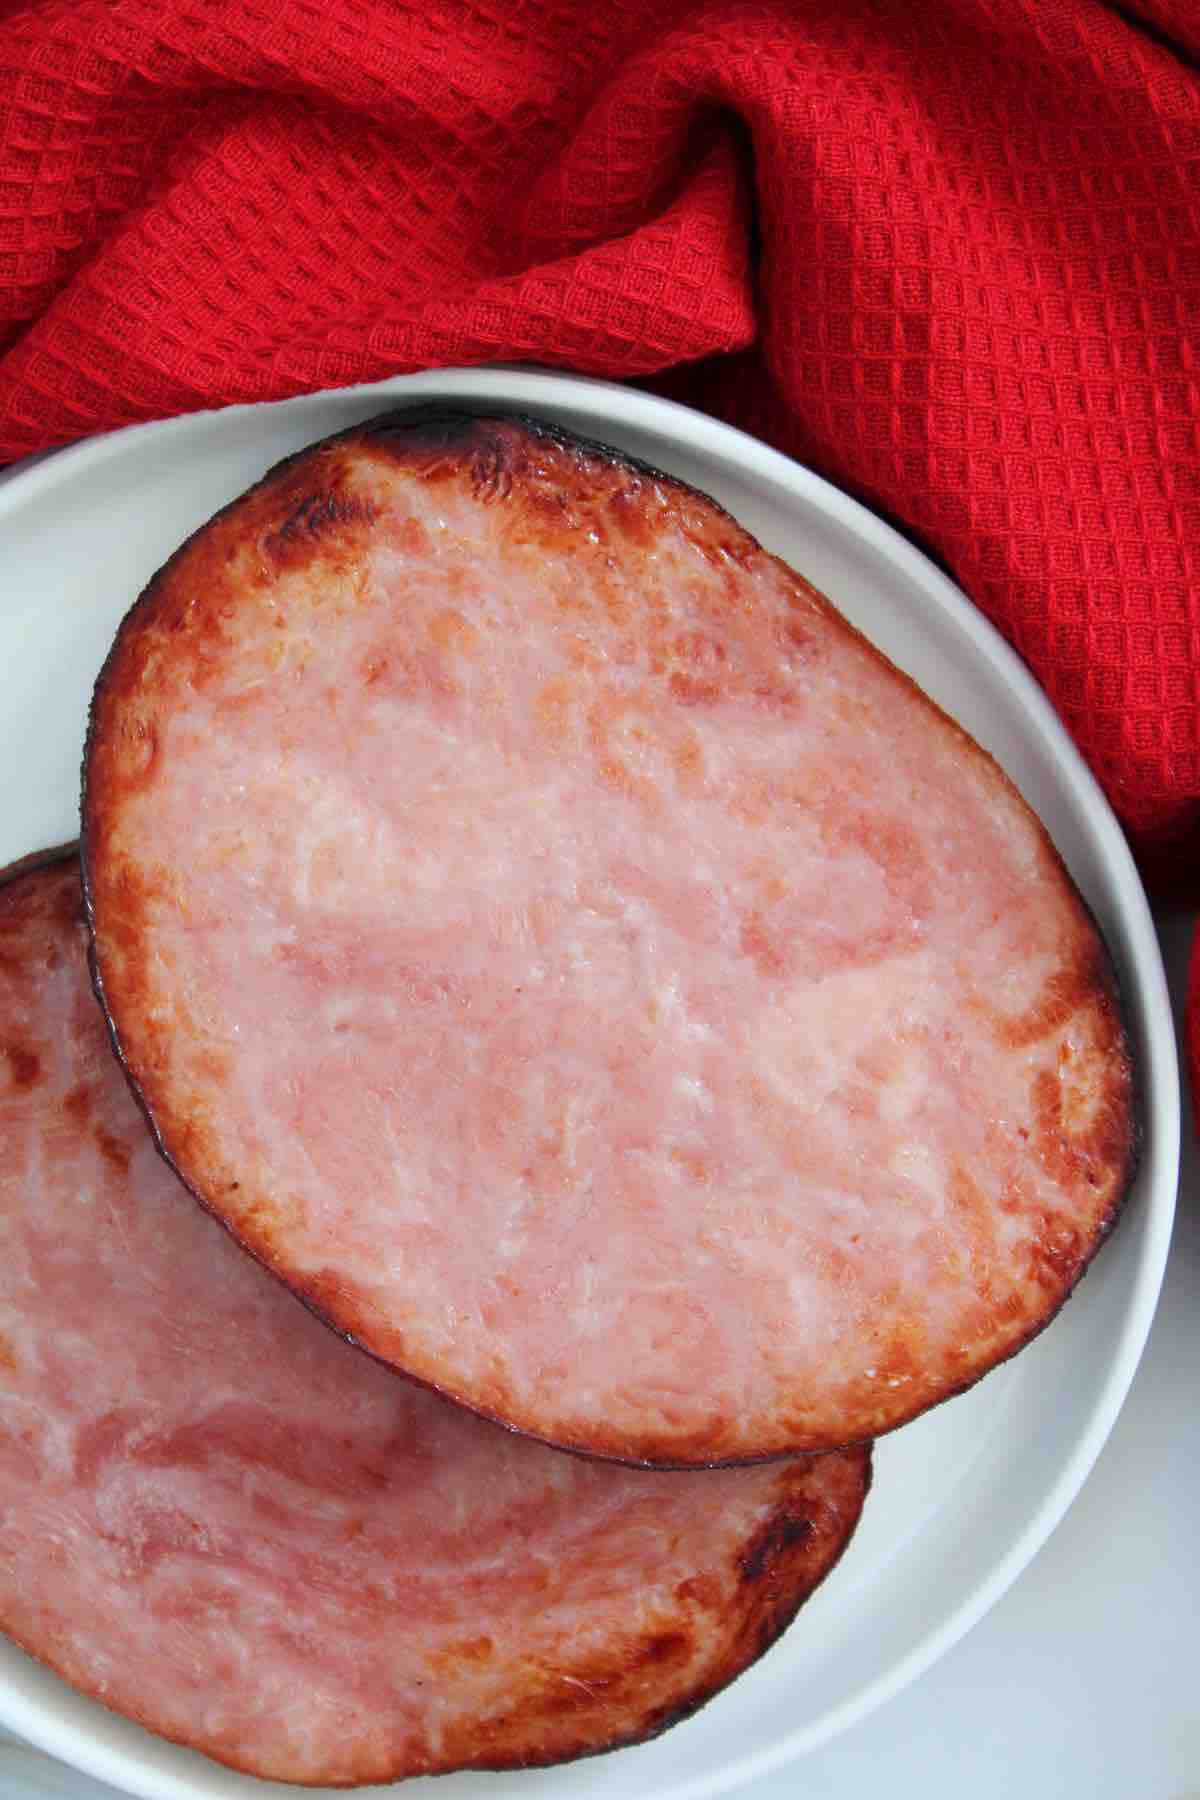 How long do you cook an uncooked ham steak?